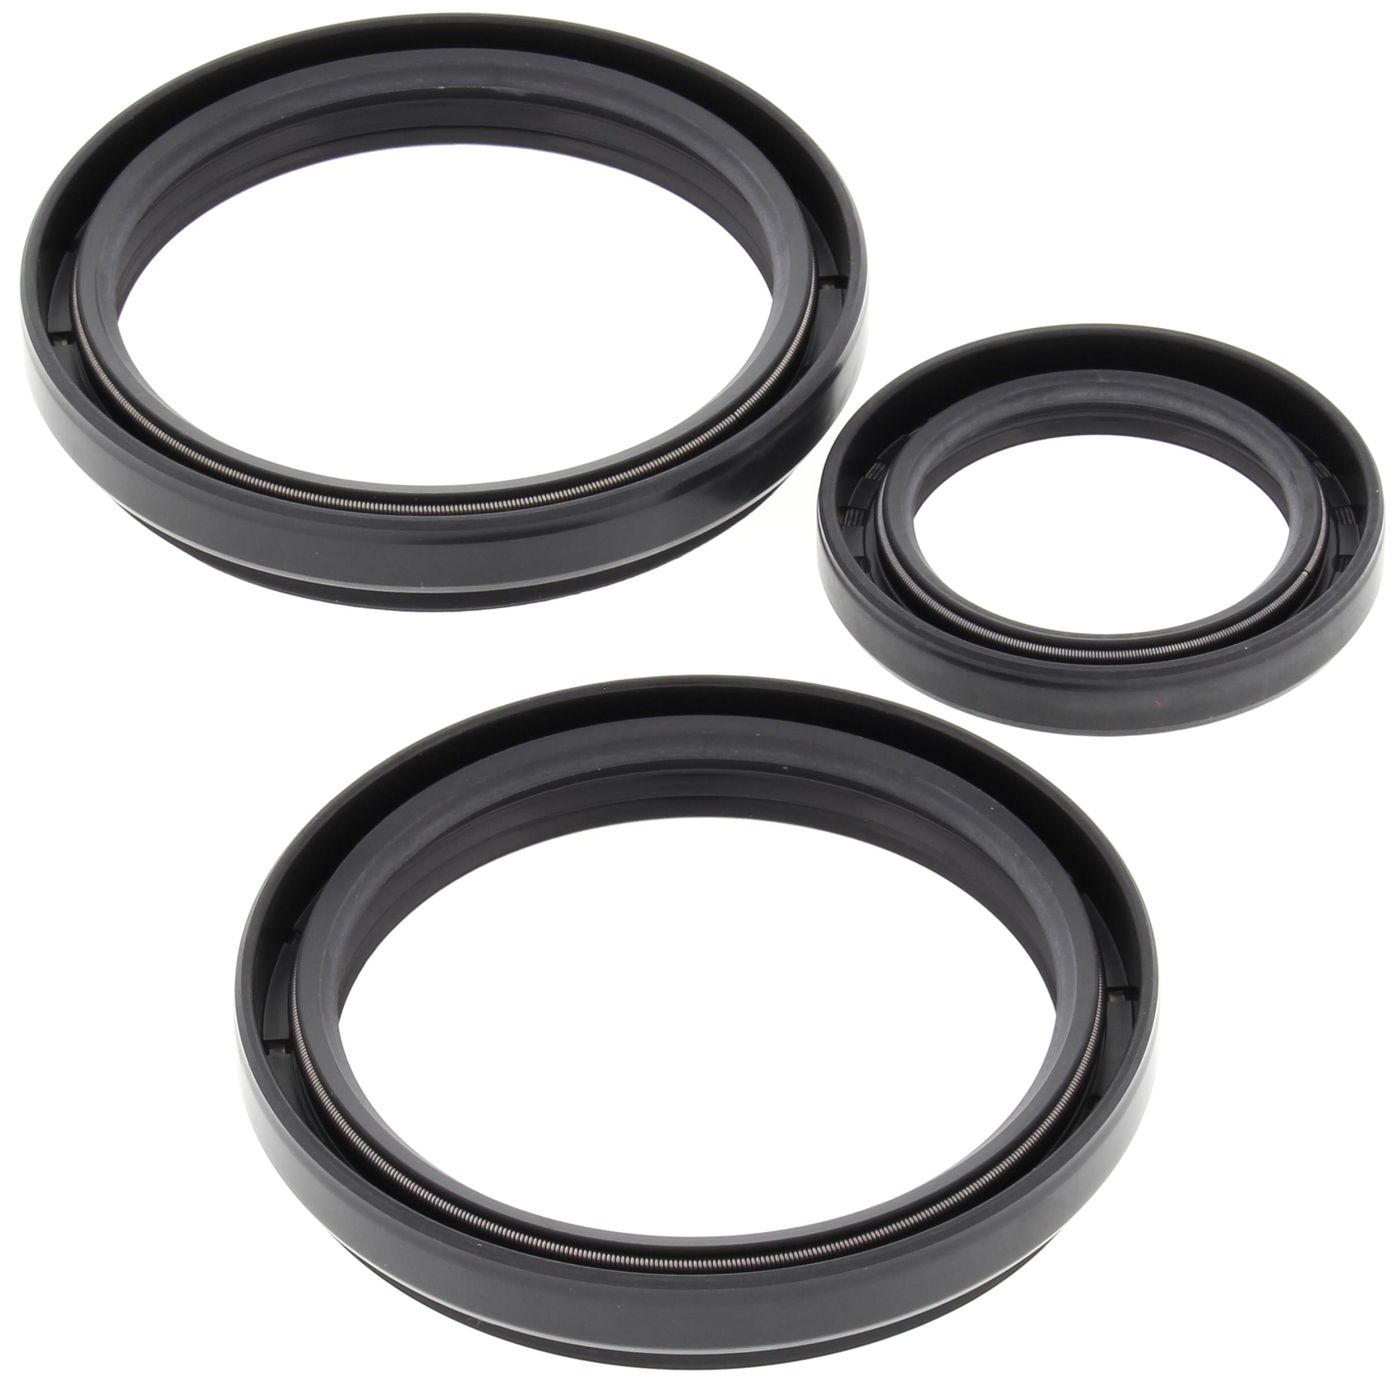 Wrp Diff Seal Kits - WRP252051-5 image